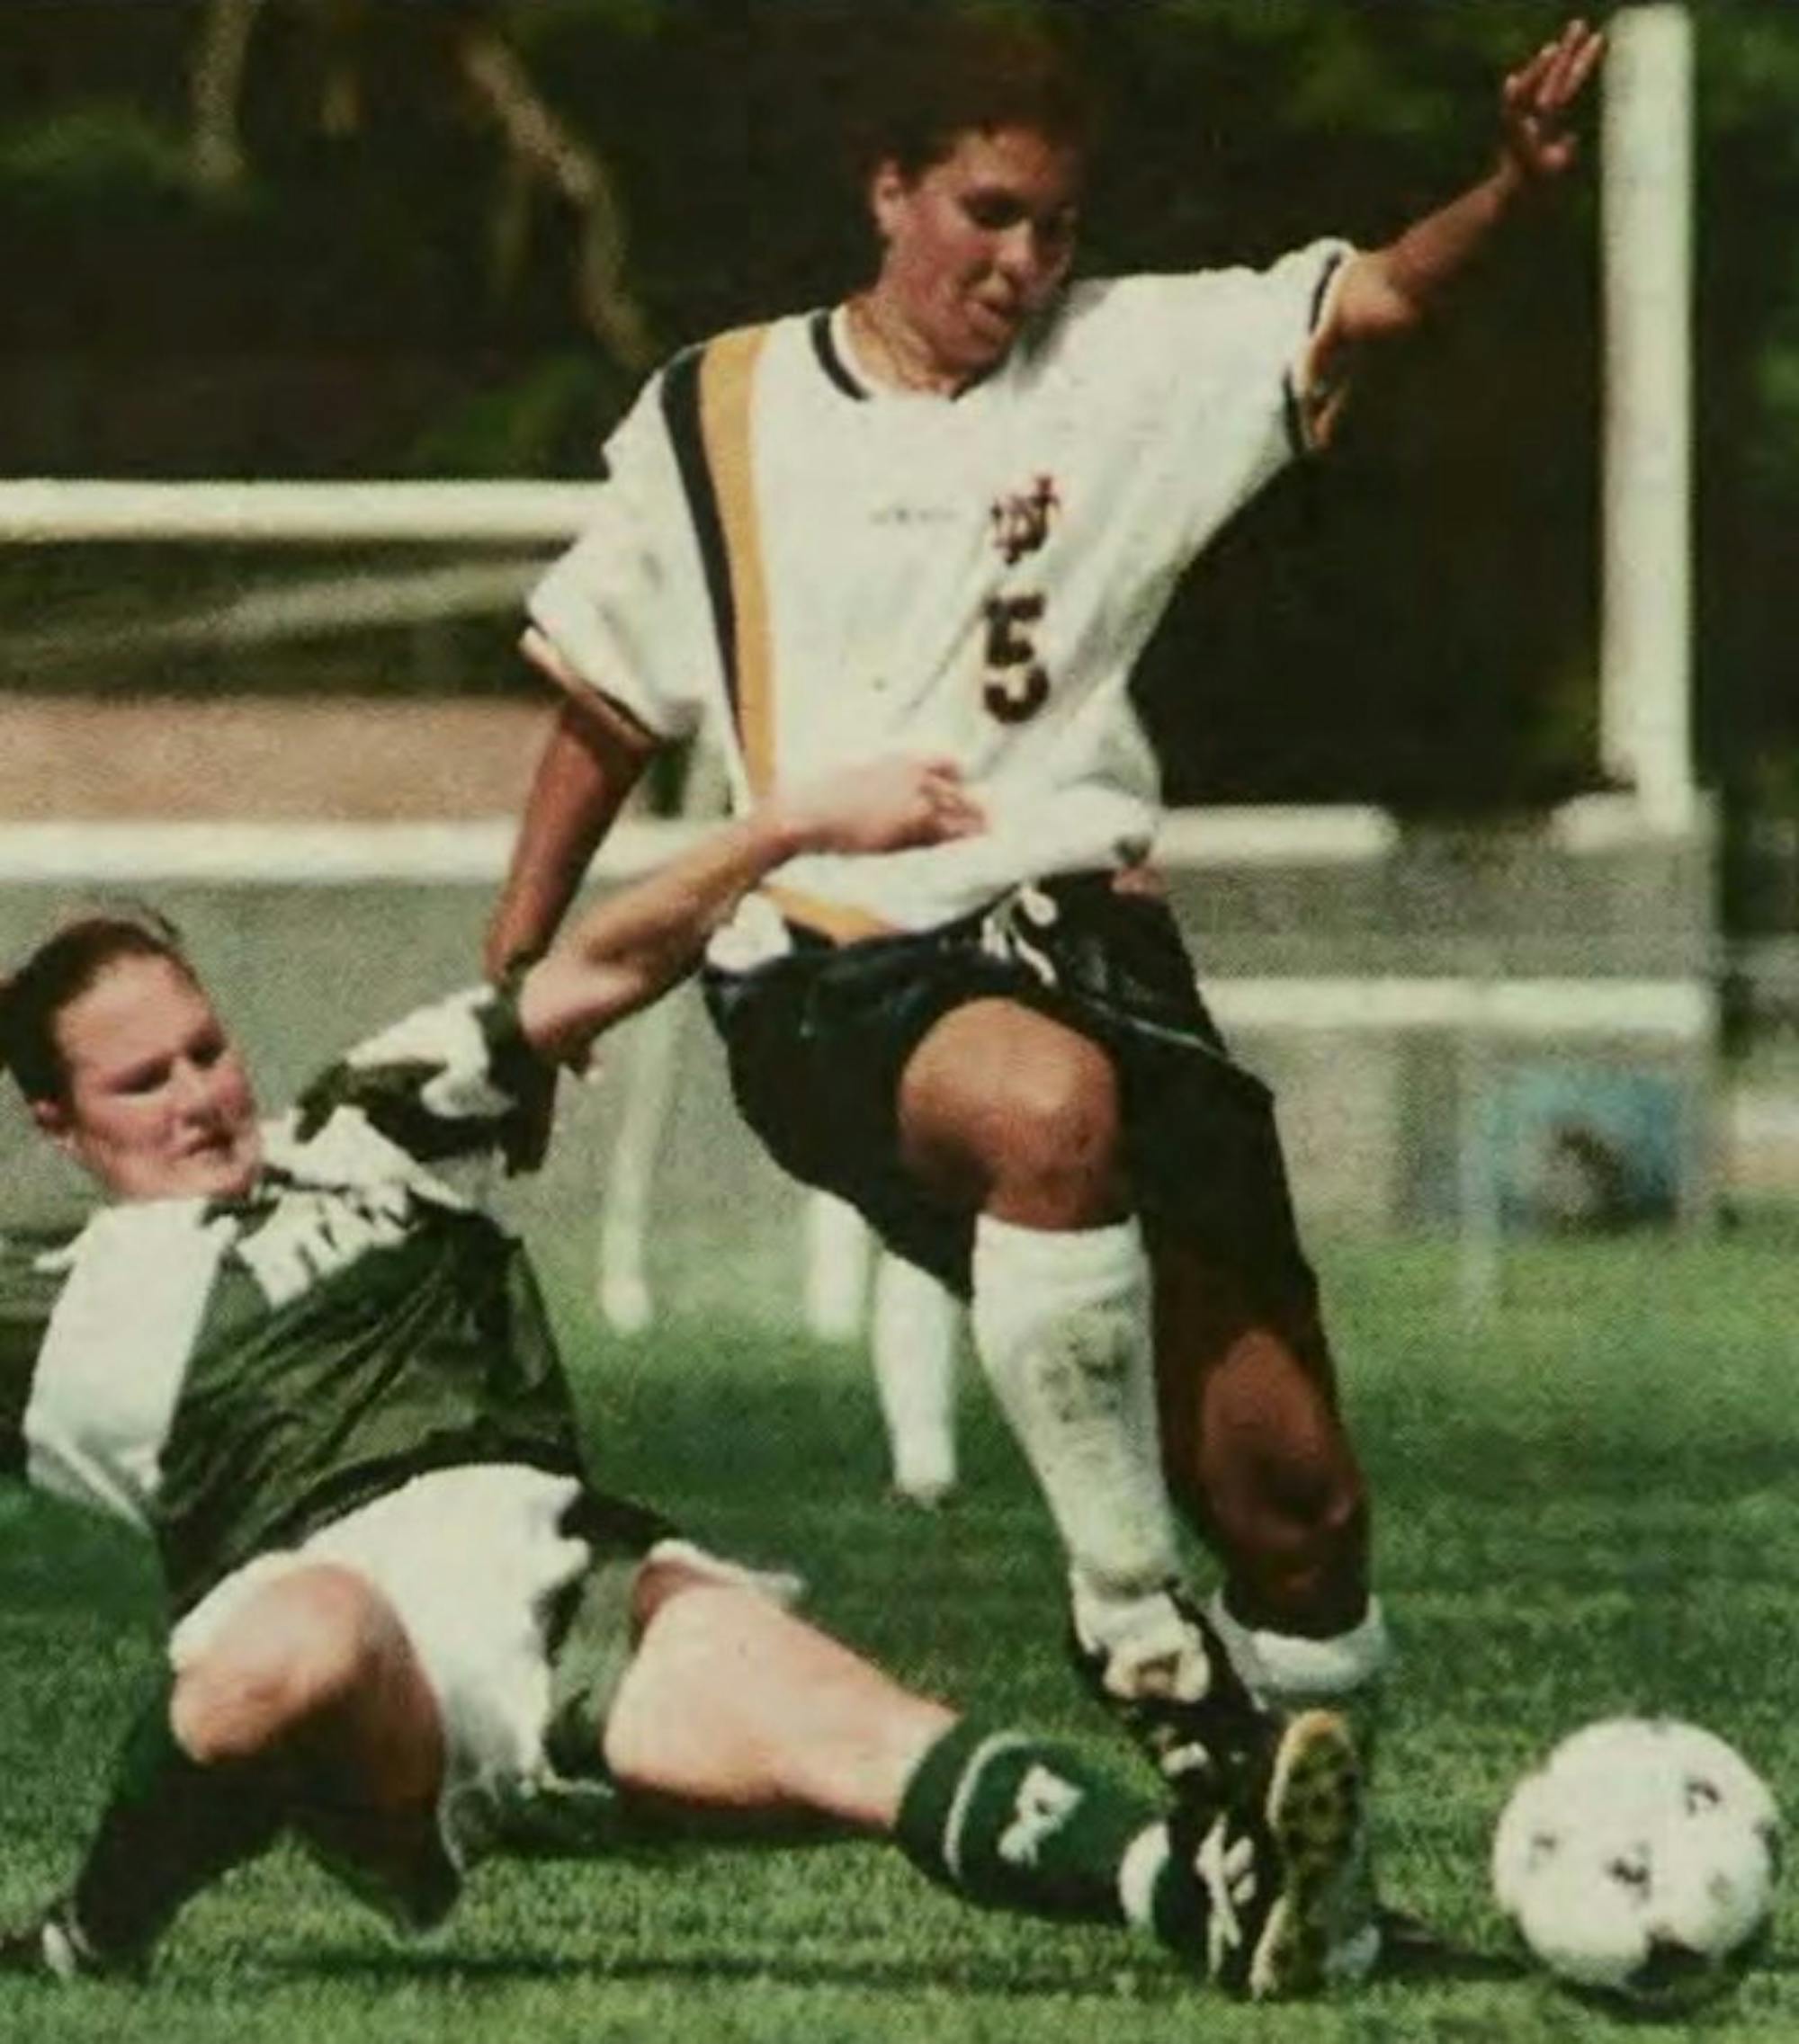 Midfielder Shannon Boxx hurdles over a slide tackle during Notre Dame’s 6-0 win over Michigan State on Aug. 31, 1997. Boxx finished her Irish career with 39 goals and 57 assists.